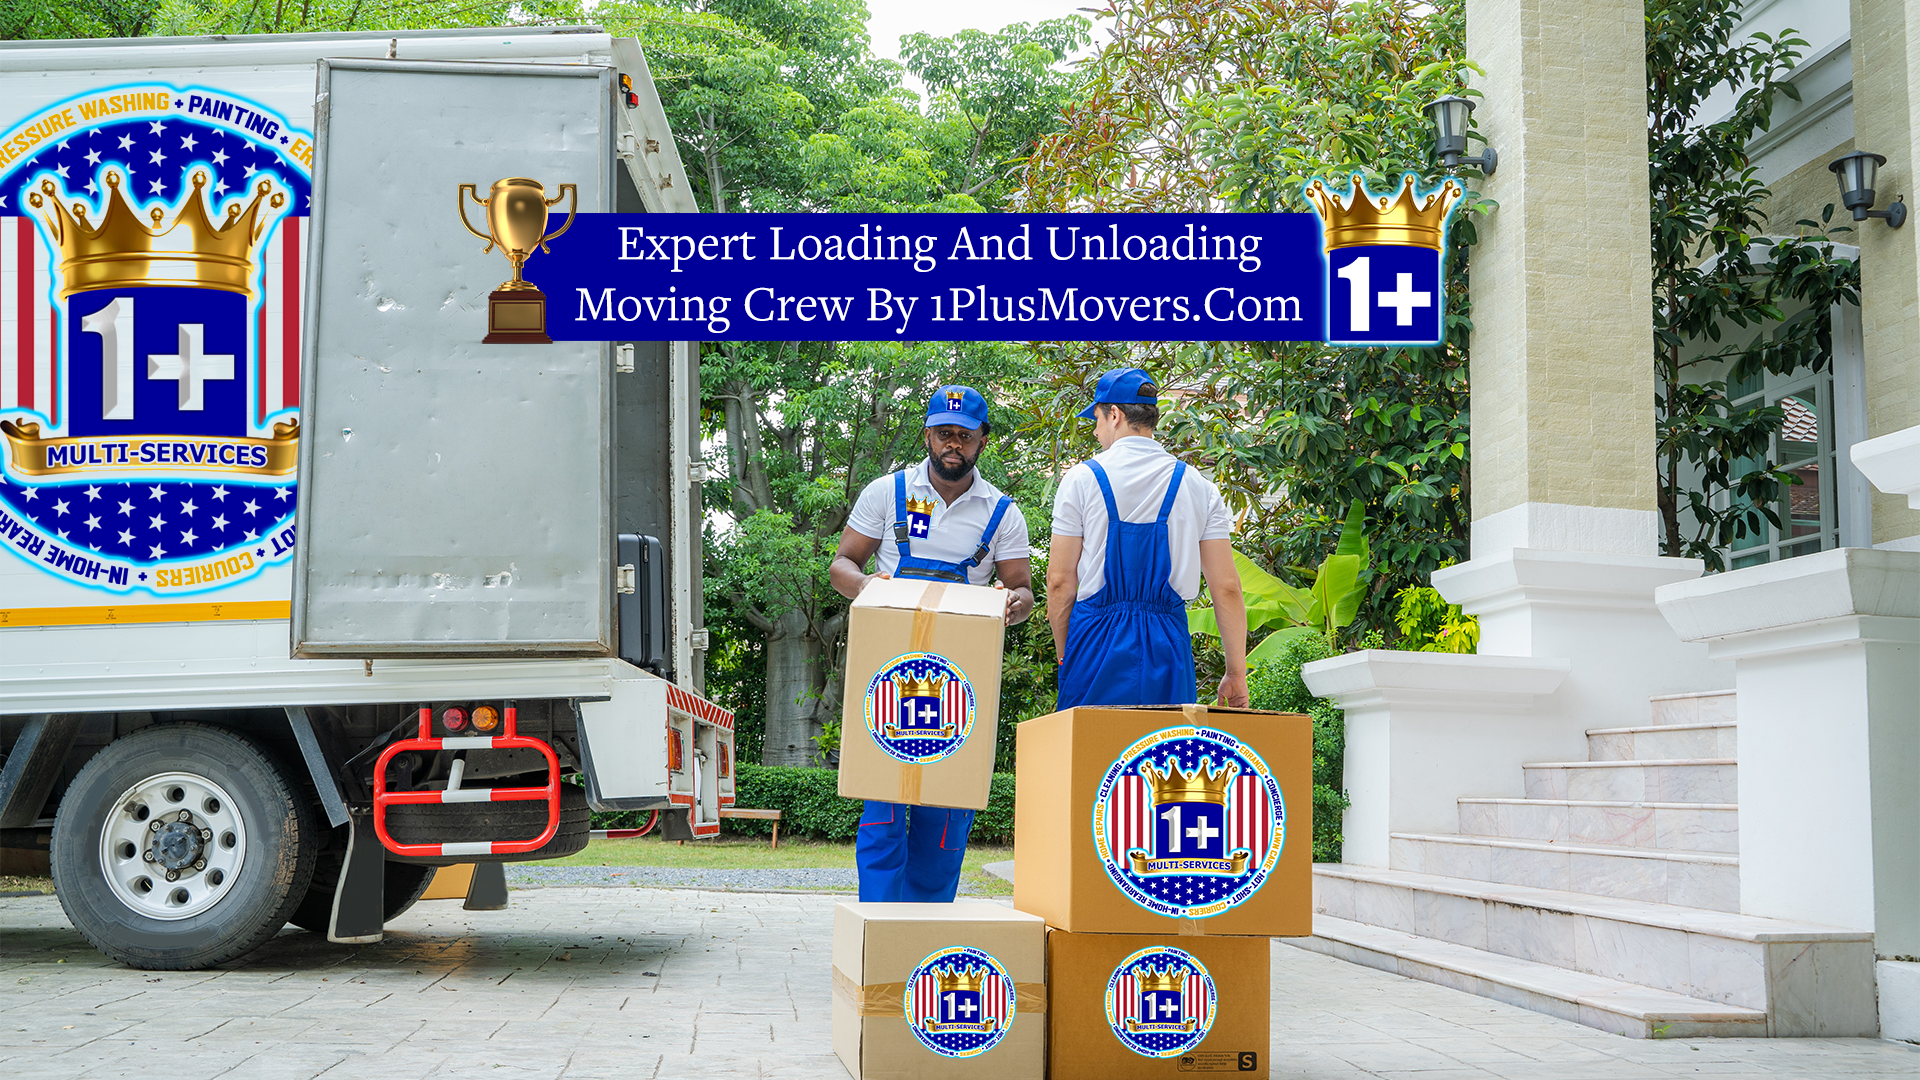 Expert Loading And Unloading Moving Crew By 1PlusMovers.Com